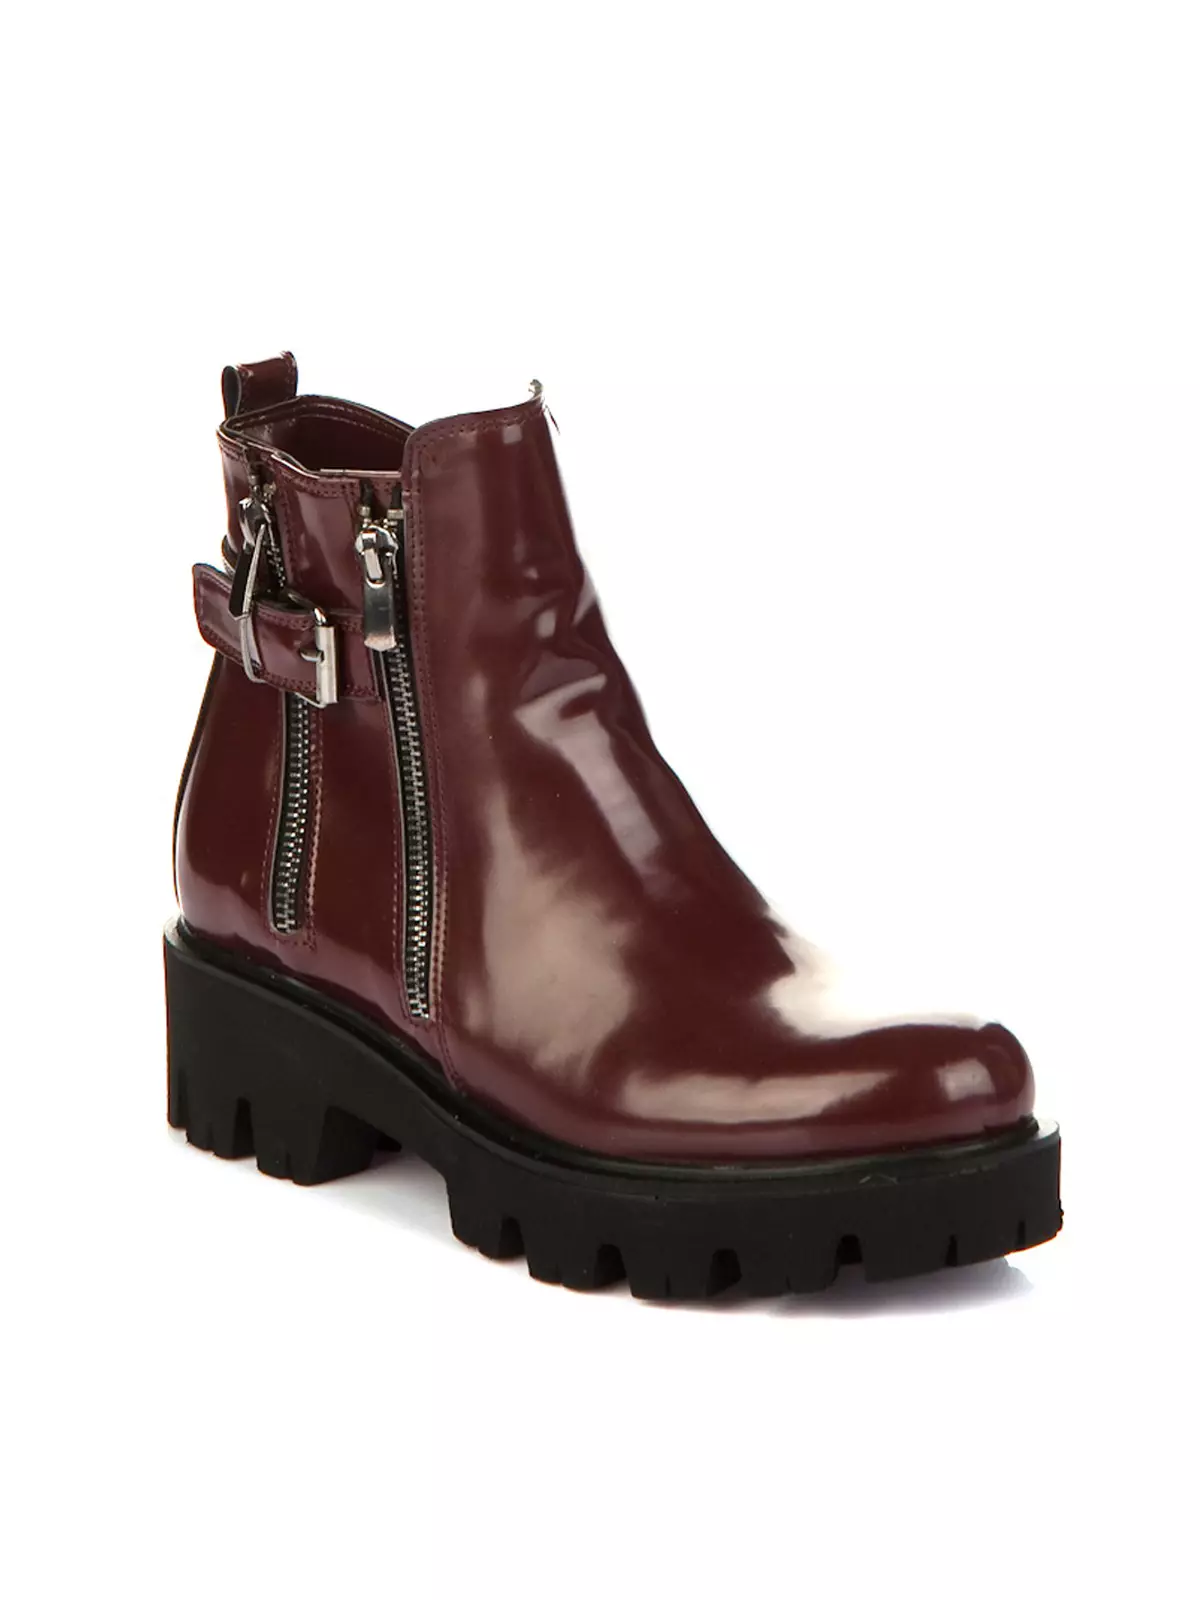 Boots (135 photos): Fashion trends 2021, from Red Rock, Eva, Camel, Grinders, How To Wear Derby with Jeans, Militari and Burgundy Style 1842_78